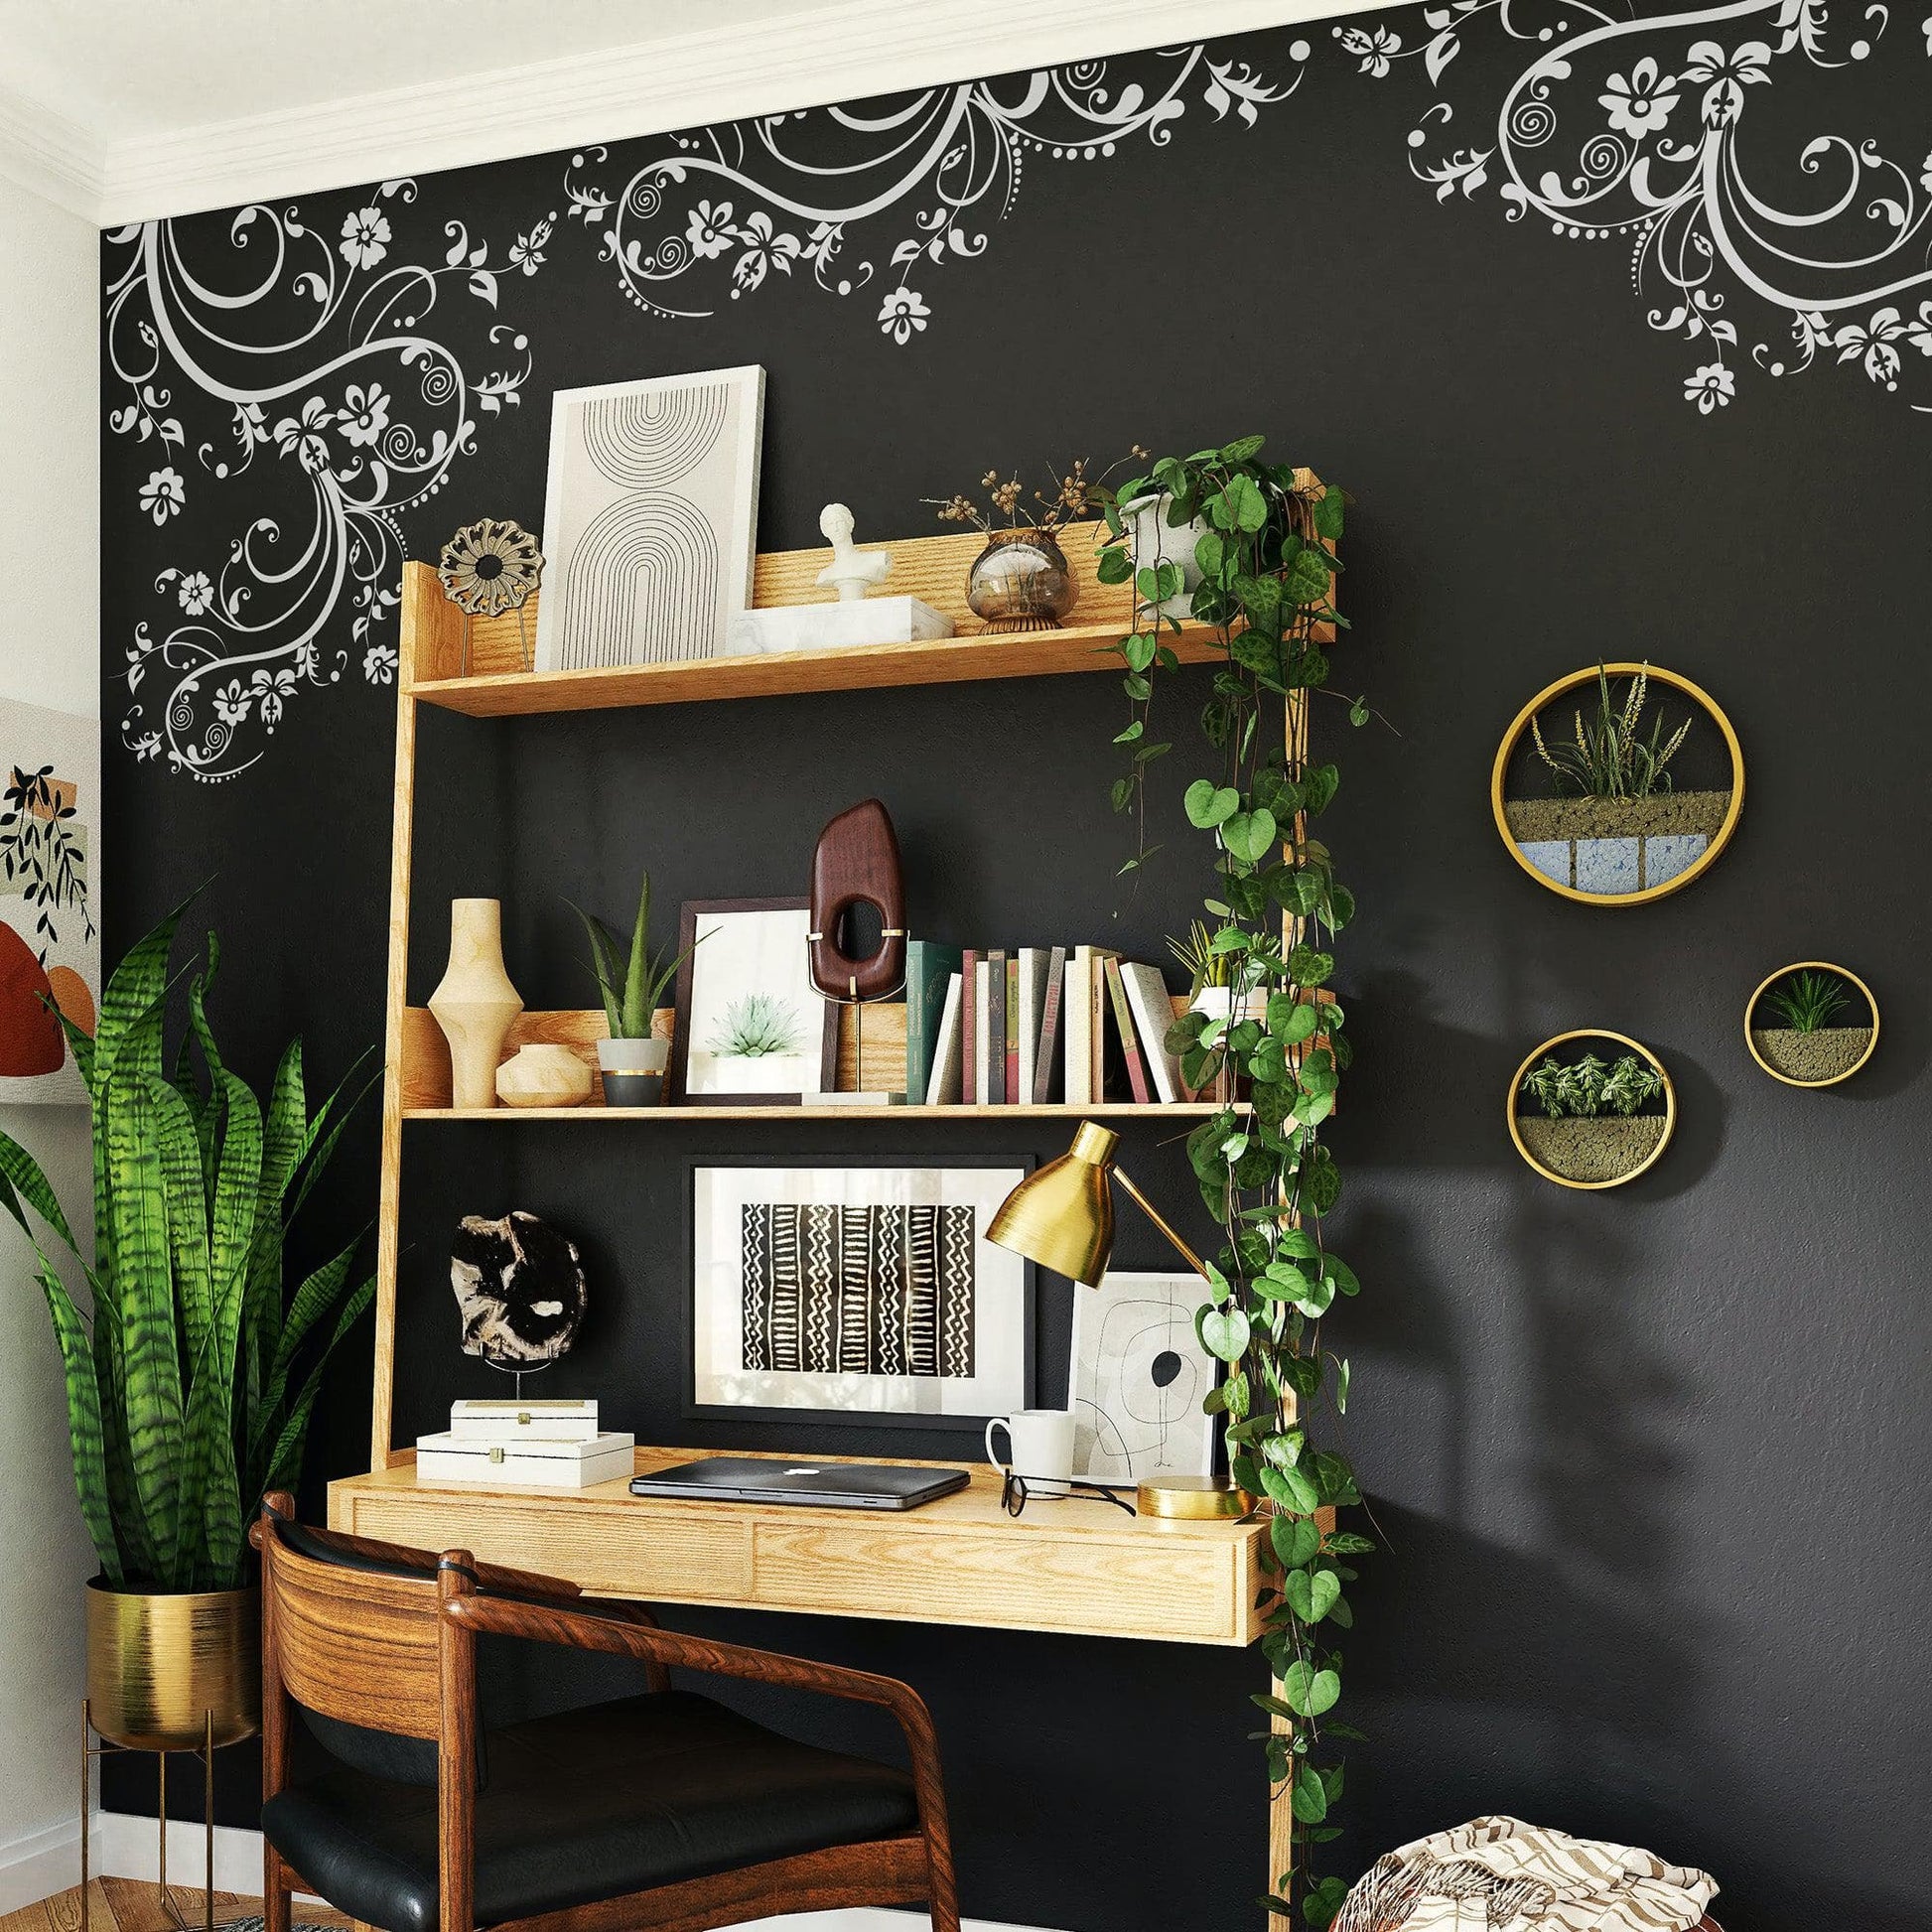 White swirling floral decals on a dark wall above a wooden desk.